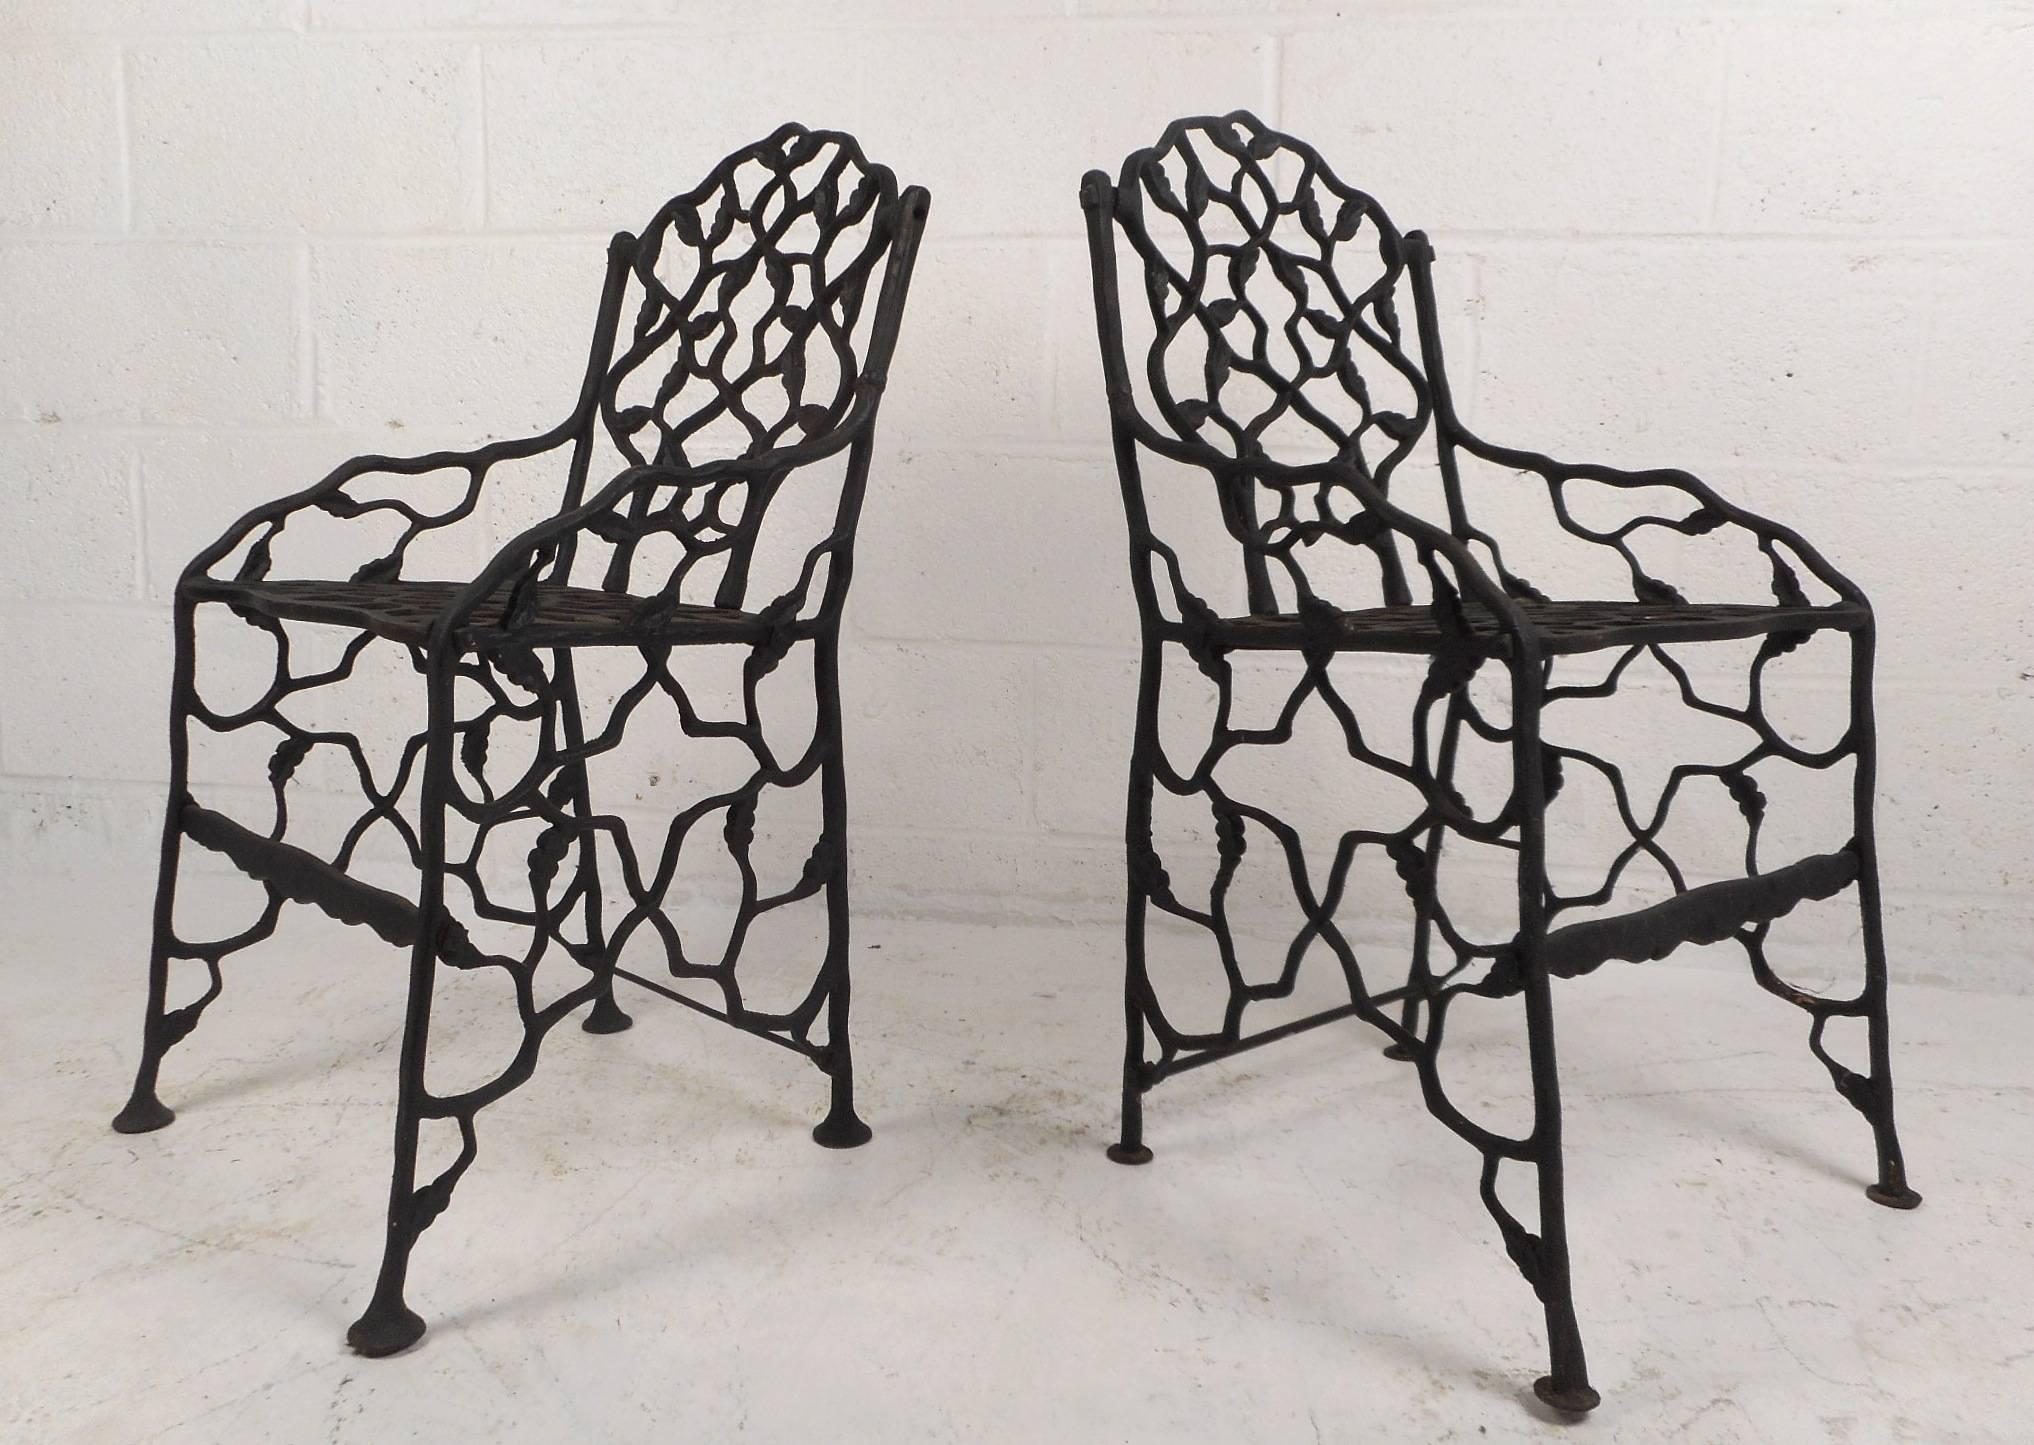 This beautiful pair of vintage cast iron garden chairs have a petite frame with bent iron and leaf detail throughout. Unusual design with a heavy iron frame, angled legs, and sculpted detail. This wonderful and rare pair of chairs make the perfect